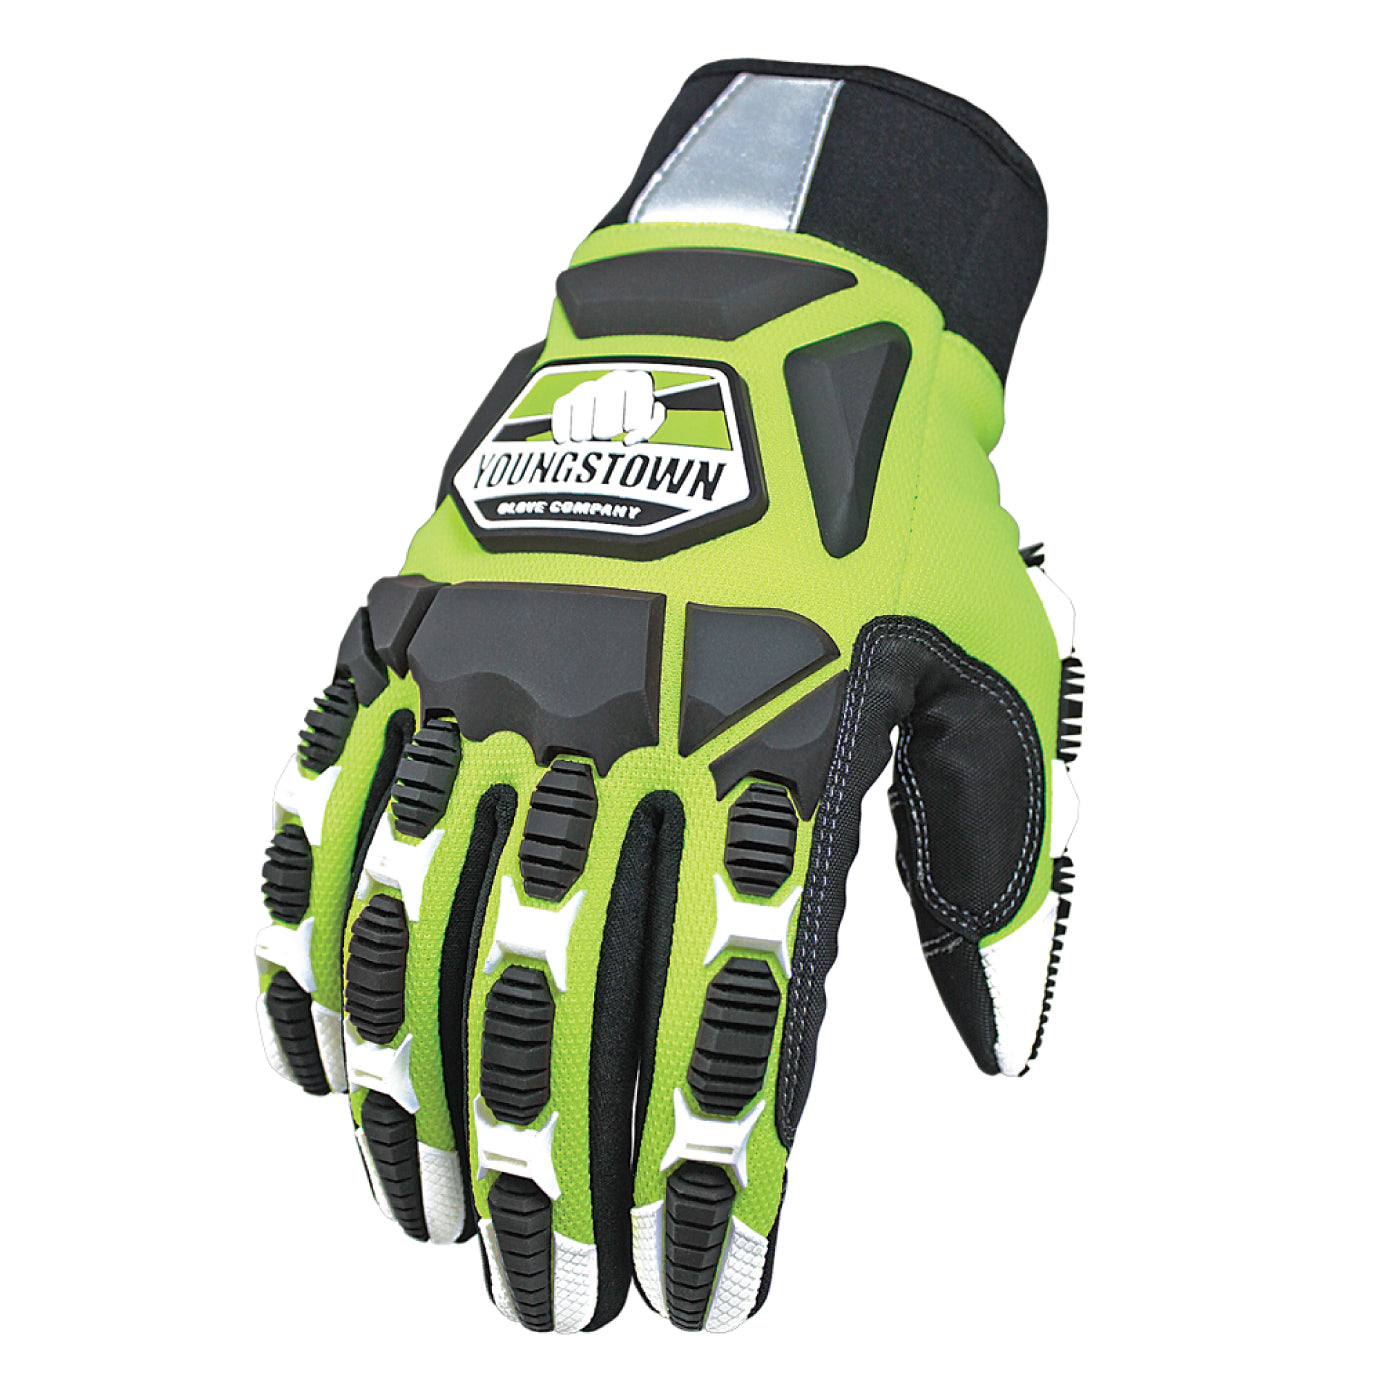 RAMHORN SAFETY Hi-ViZ Reflective Work Gloves Men And Women, Utility  Mechanic Working Gloves Touch Screen, Flexible, Breathable, Wear-Resistant  Gloves